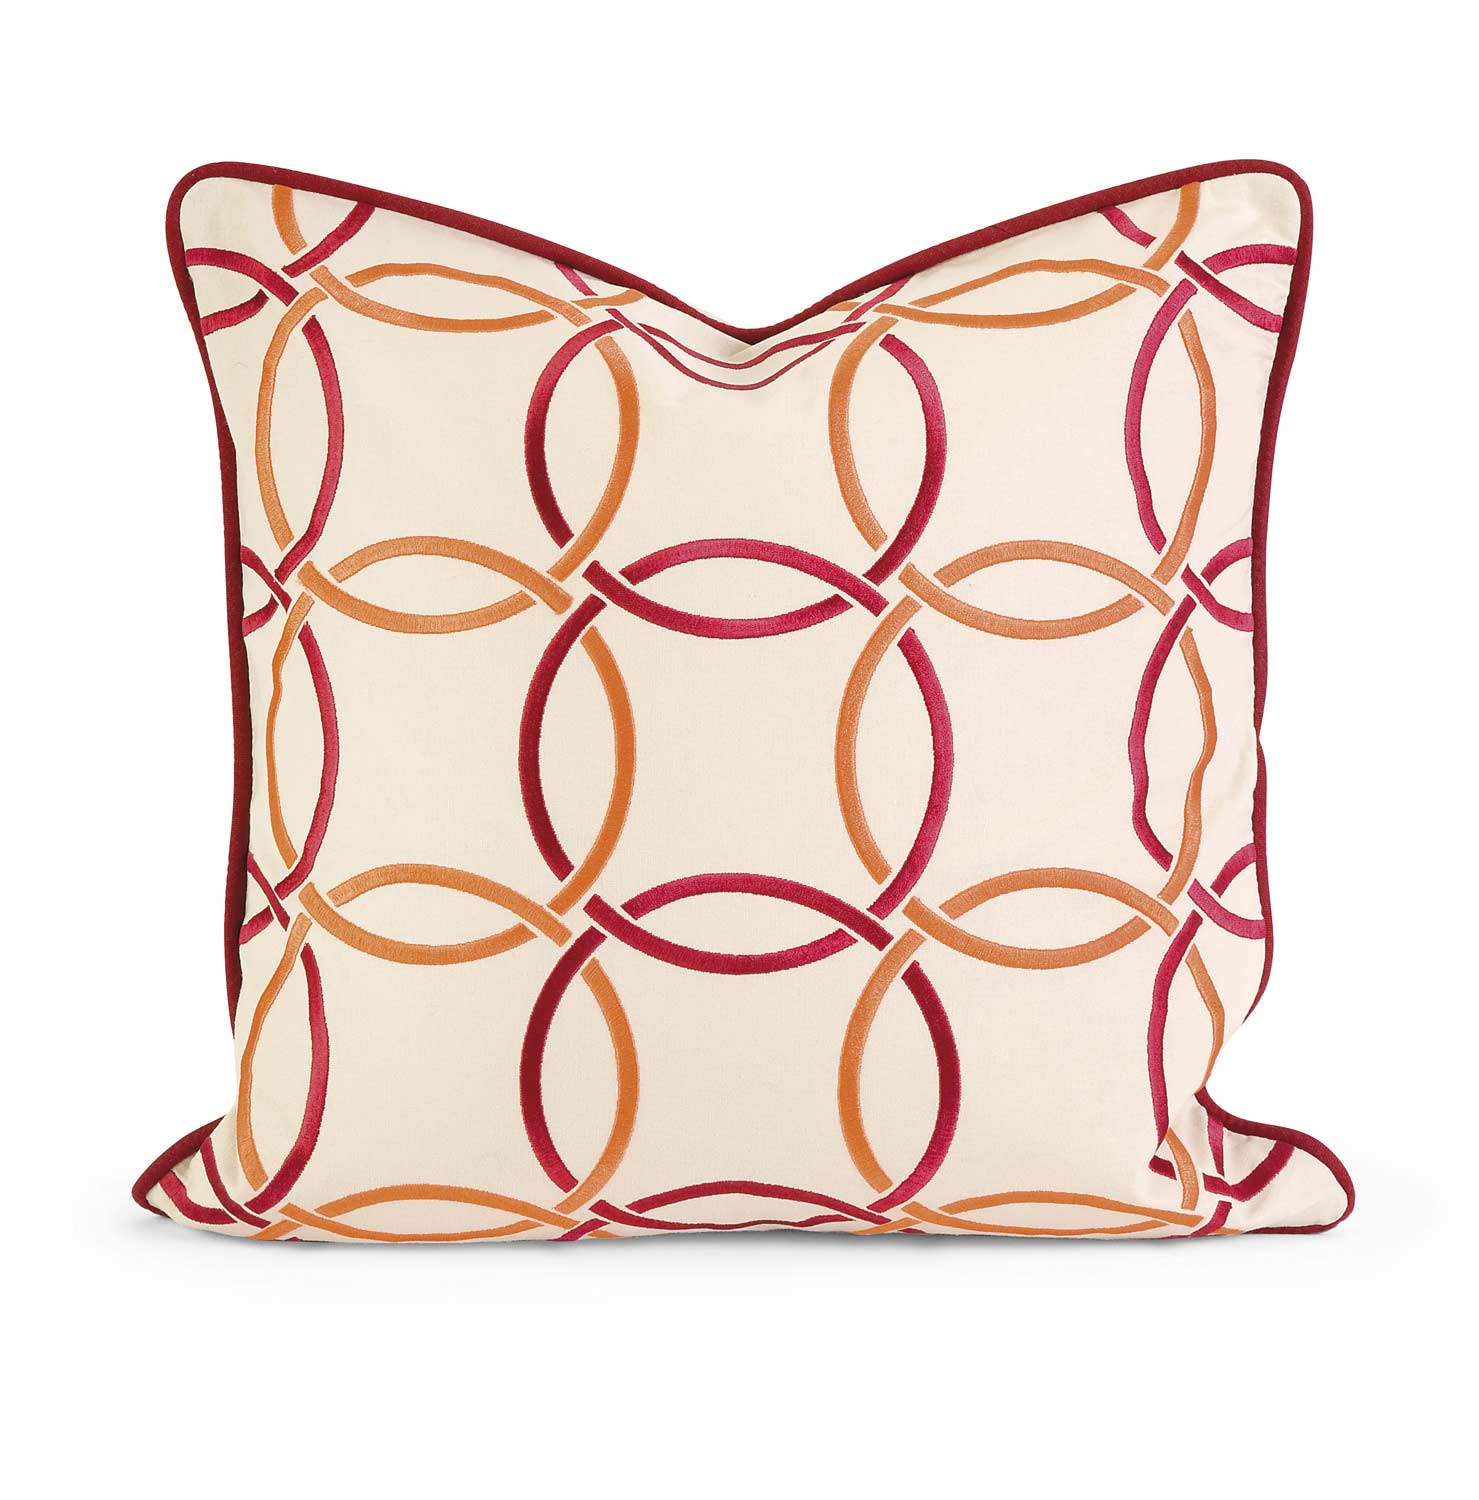 IMAX Ik Catina Orange Red Embroidered Linen Pillow with Down Fill